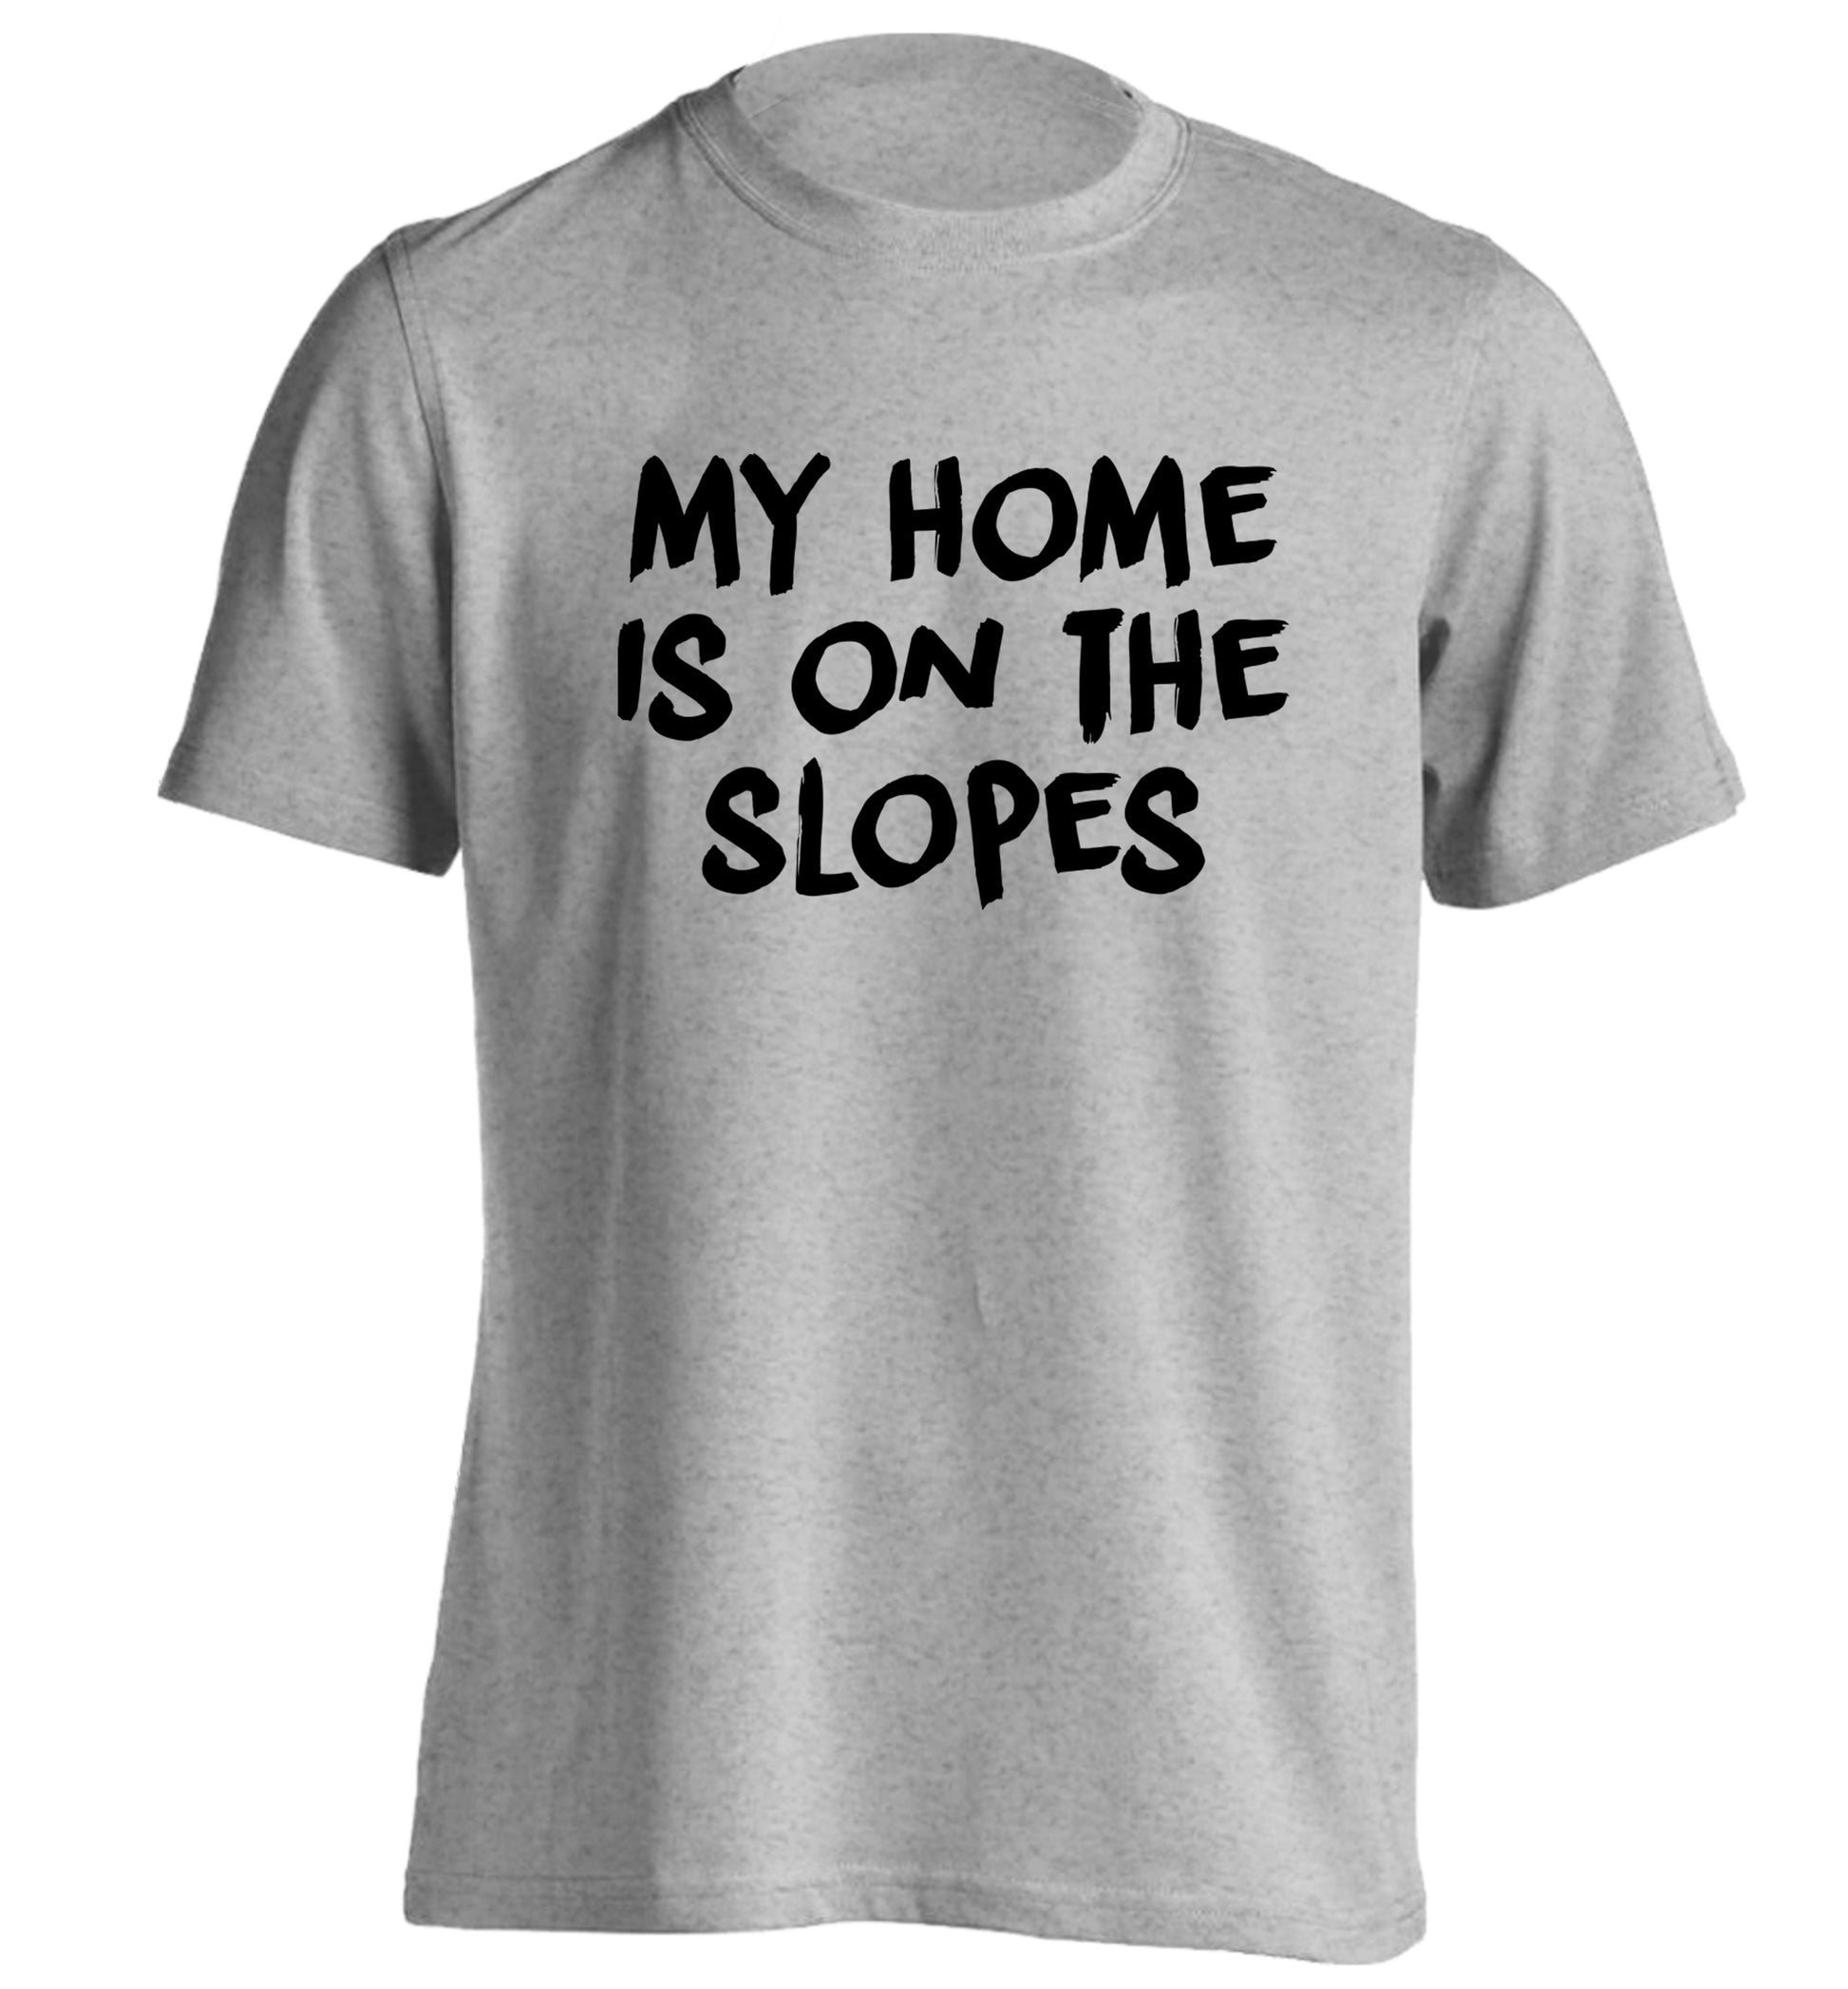 My home is on the slopes adults unisexgrey Tshirt 2XL